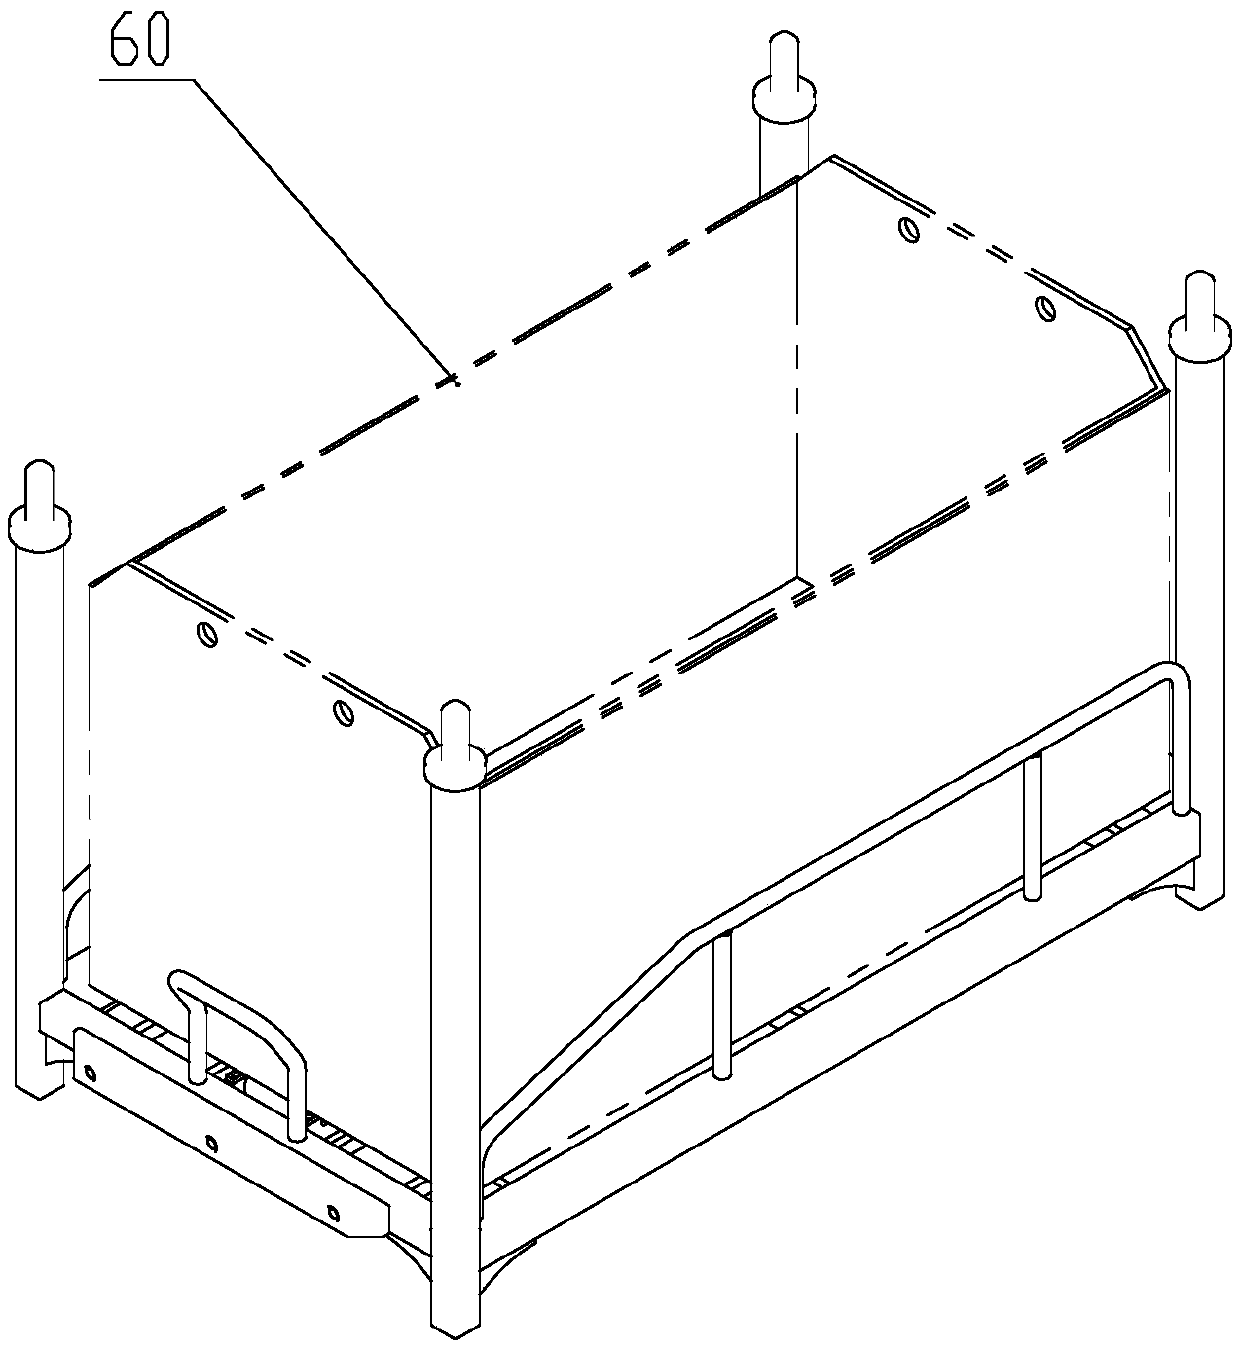 Storage battery pull-out and transfer bracket assembly